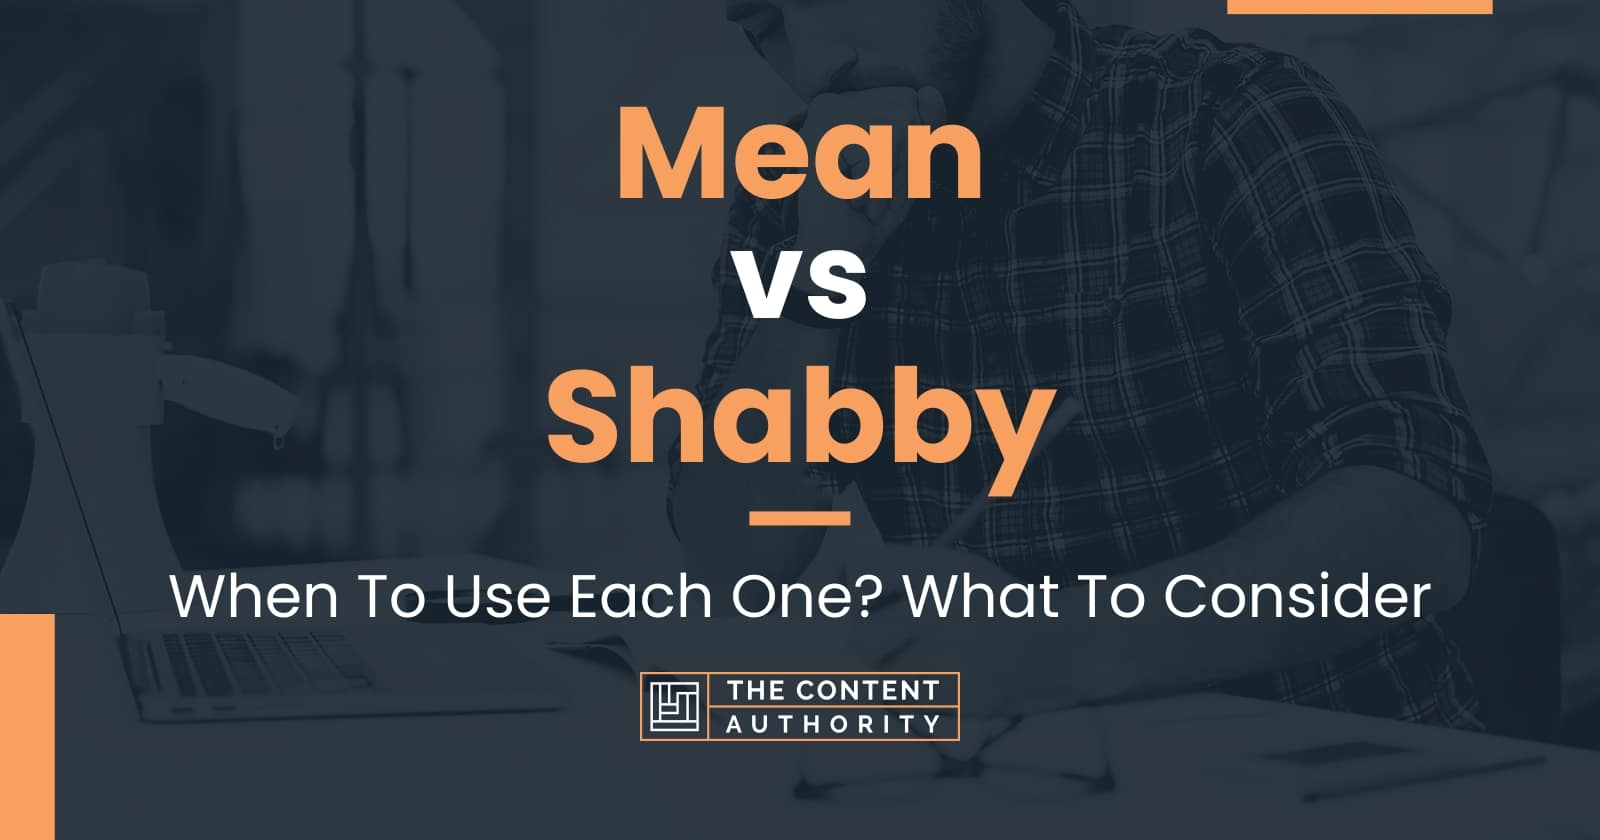 Mean vs Shabby: When To Use Each One? What To Consider